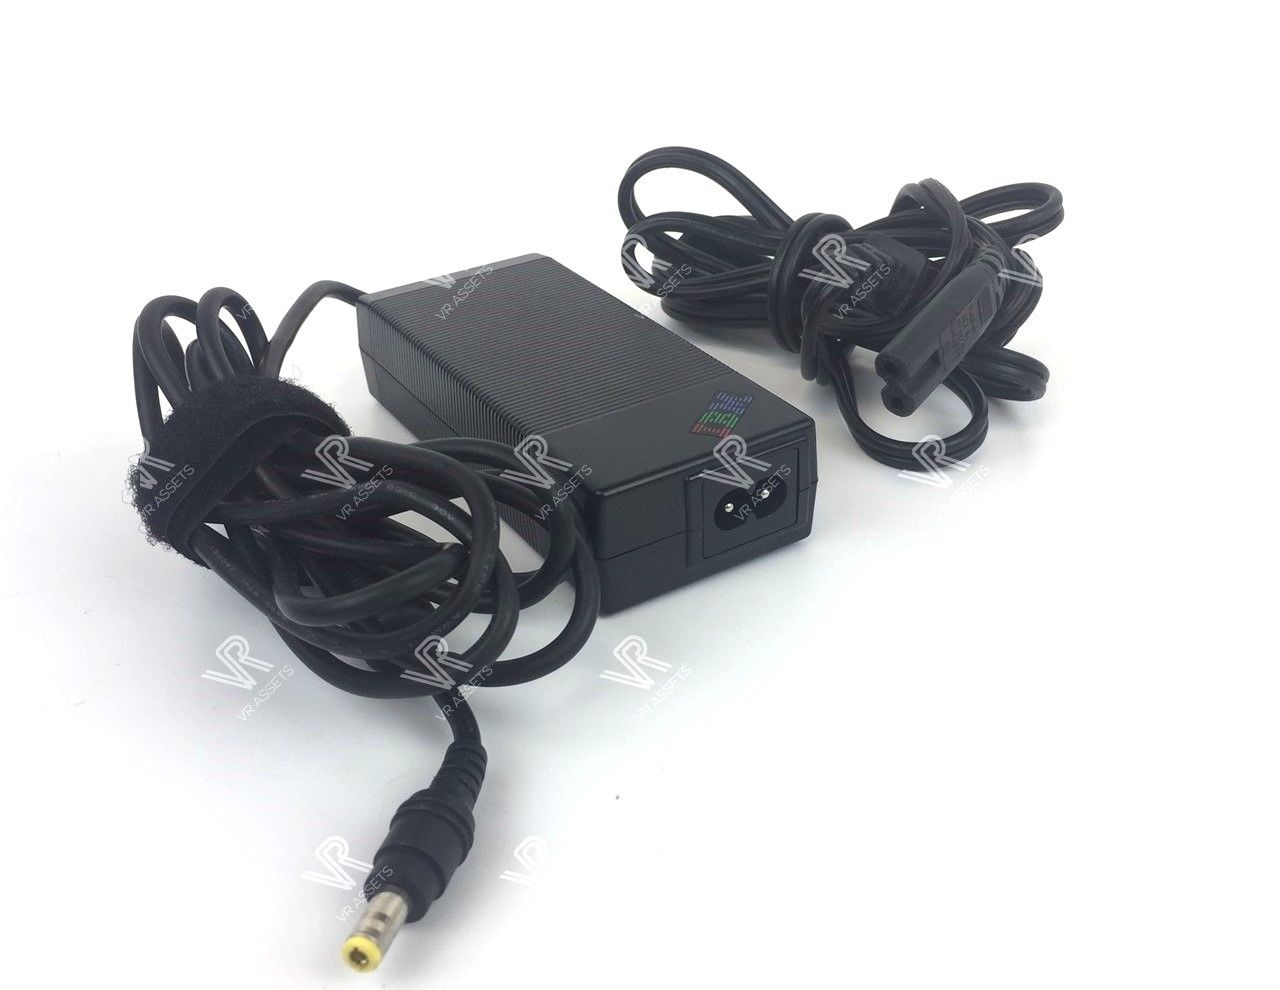 IBM AC Power Adapter with Cord 16V 4.5A Black 08K8208 08K8209